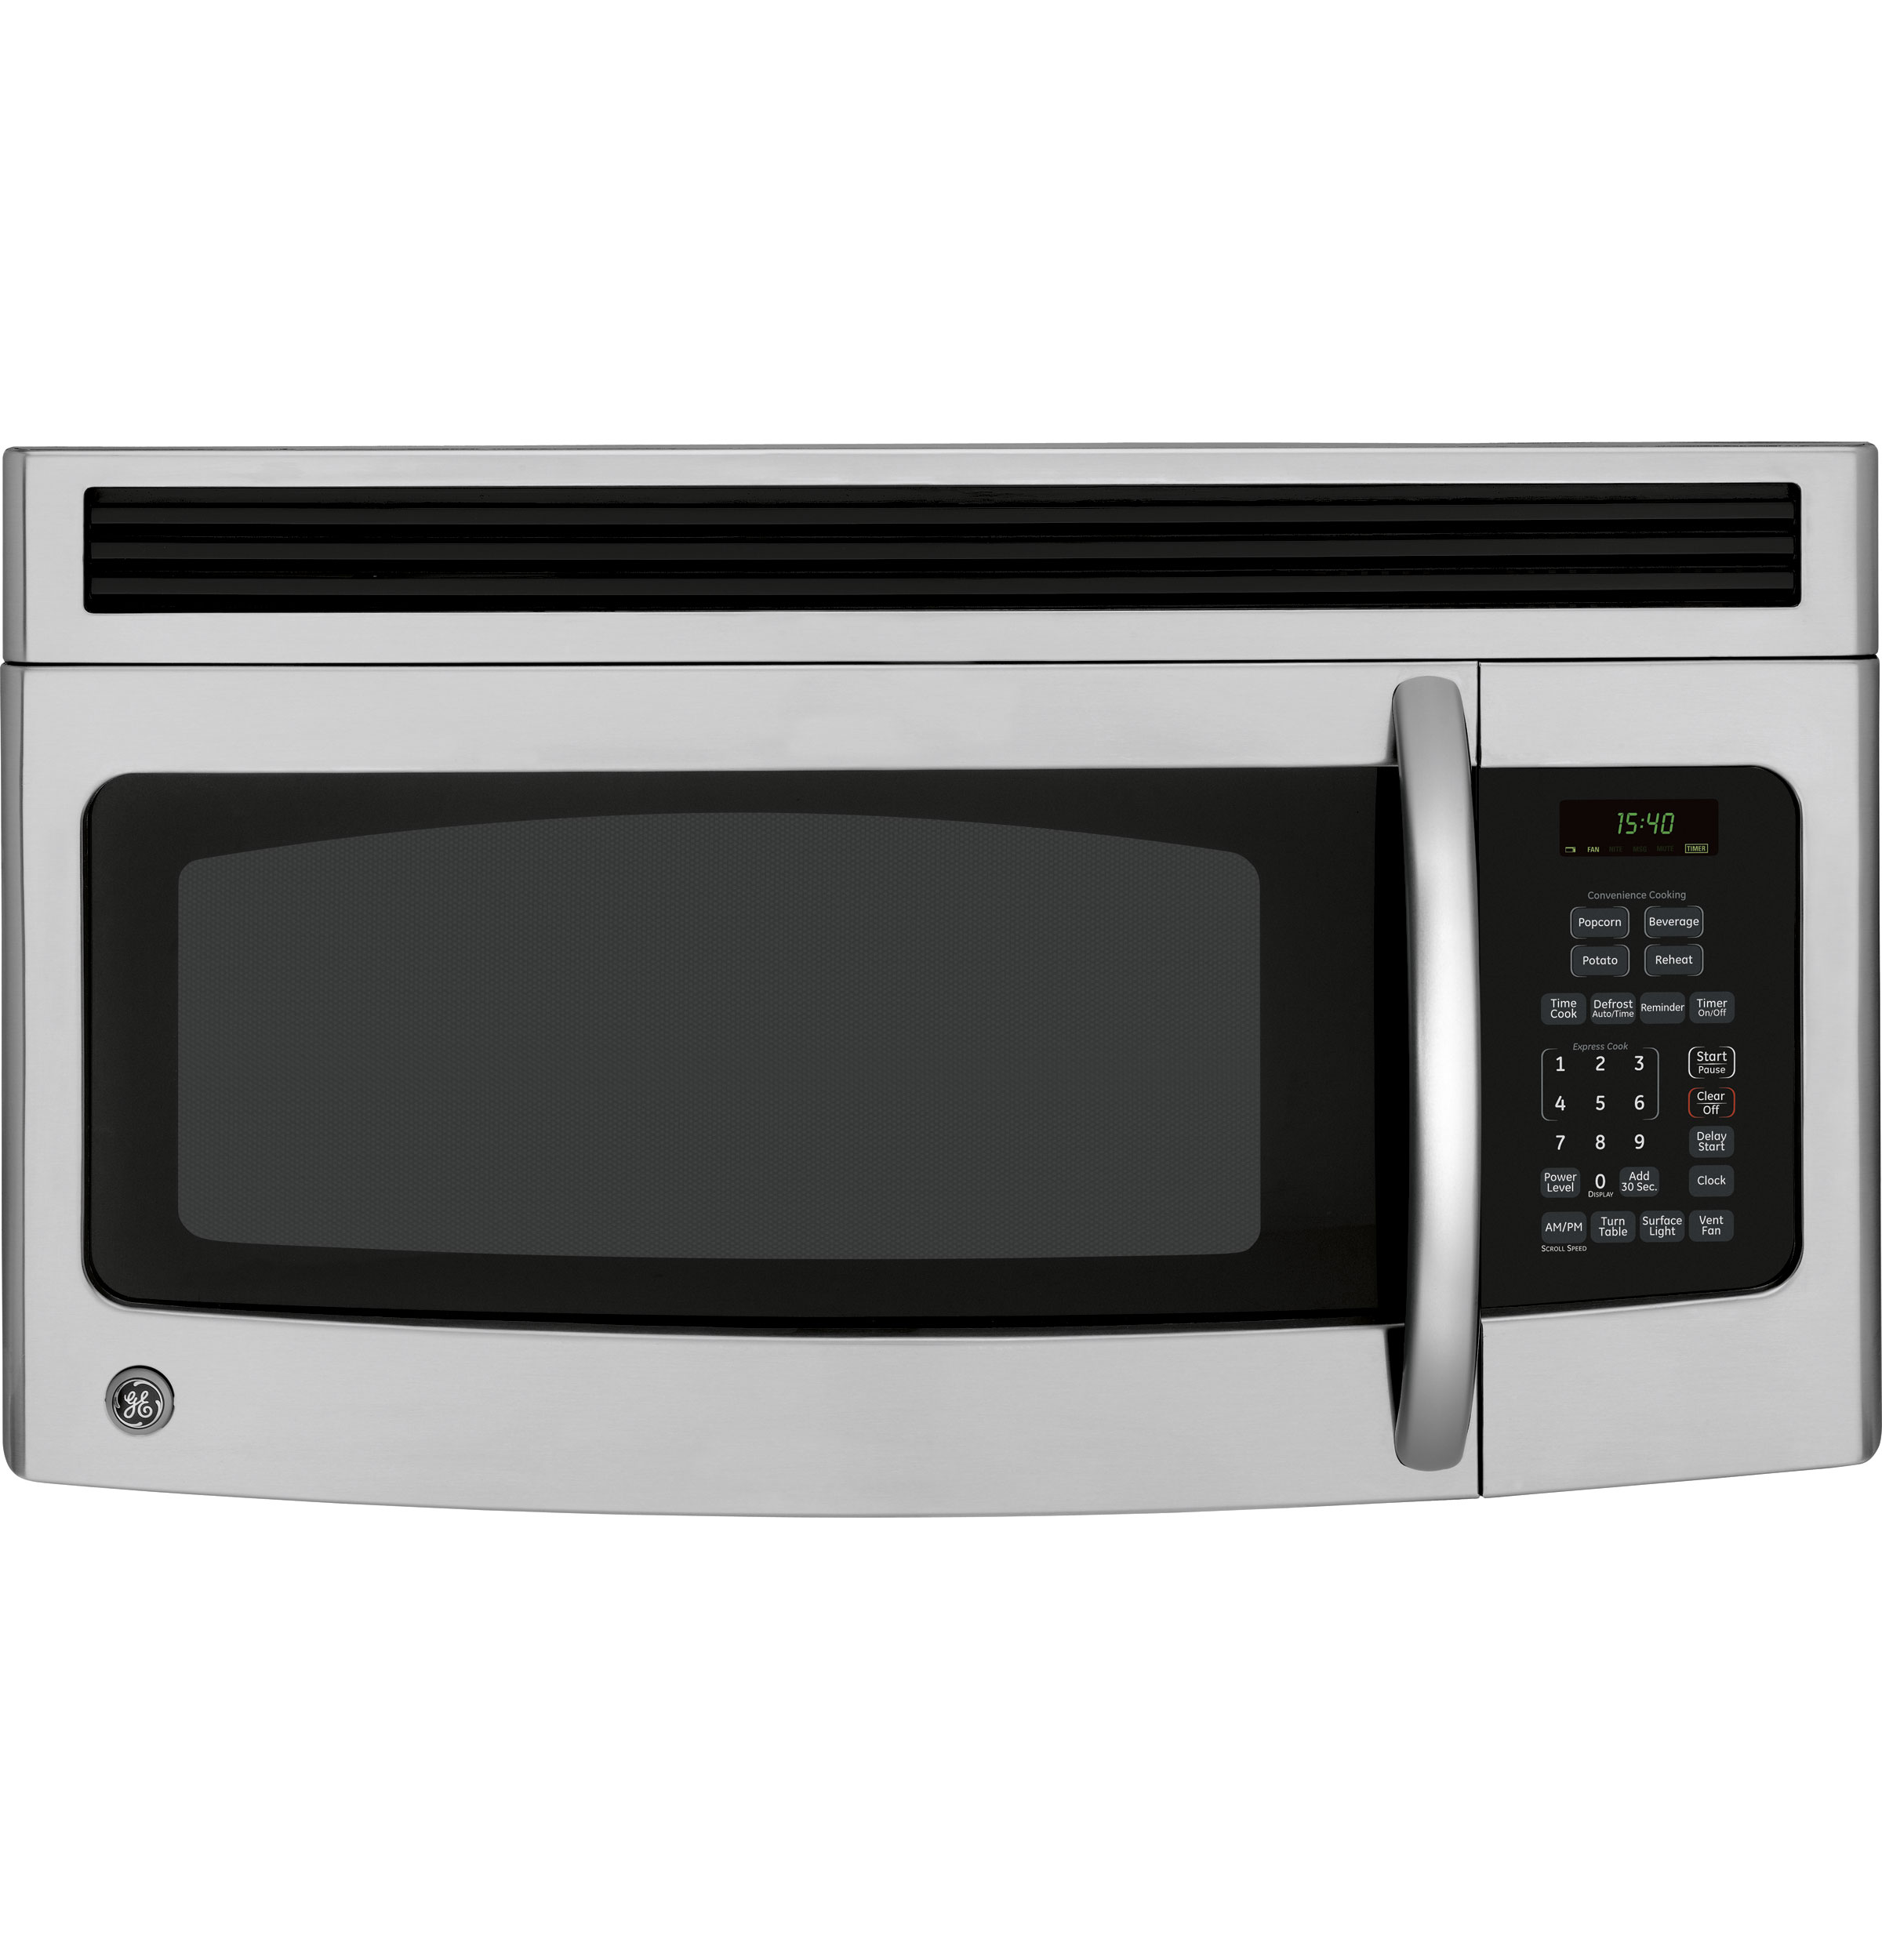 GE Spacemaker® Over-the-Range Microwave Oven